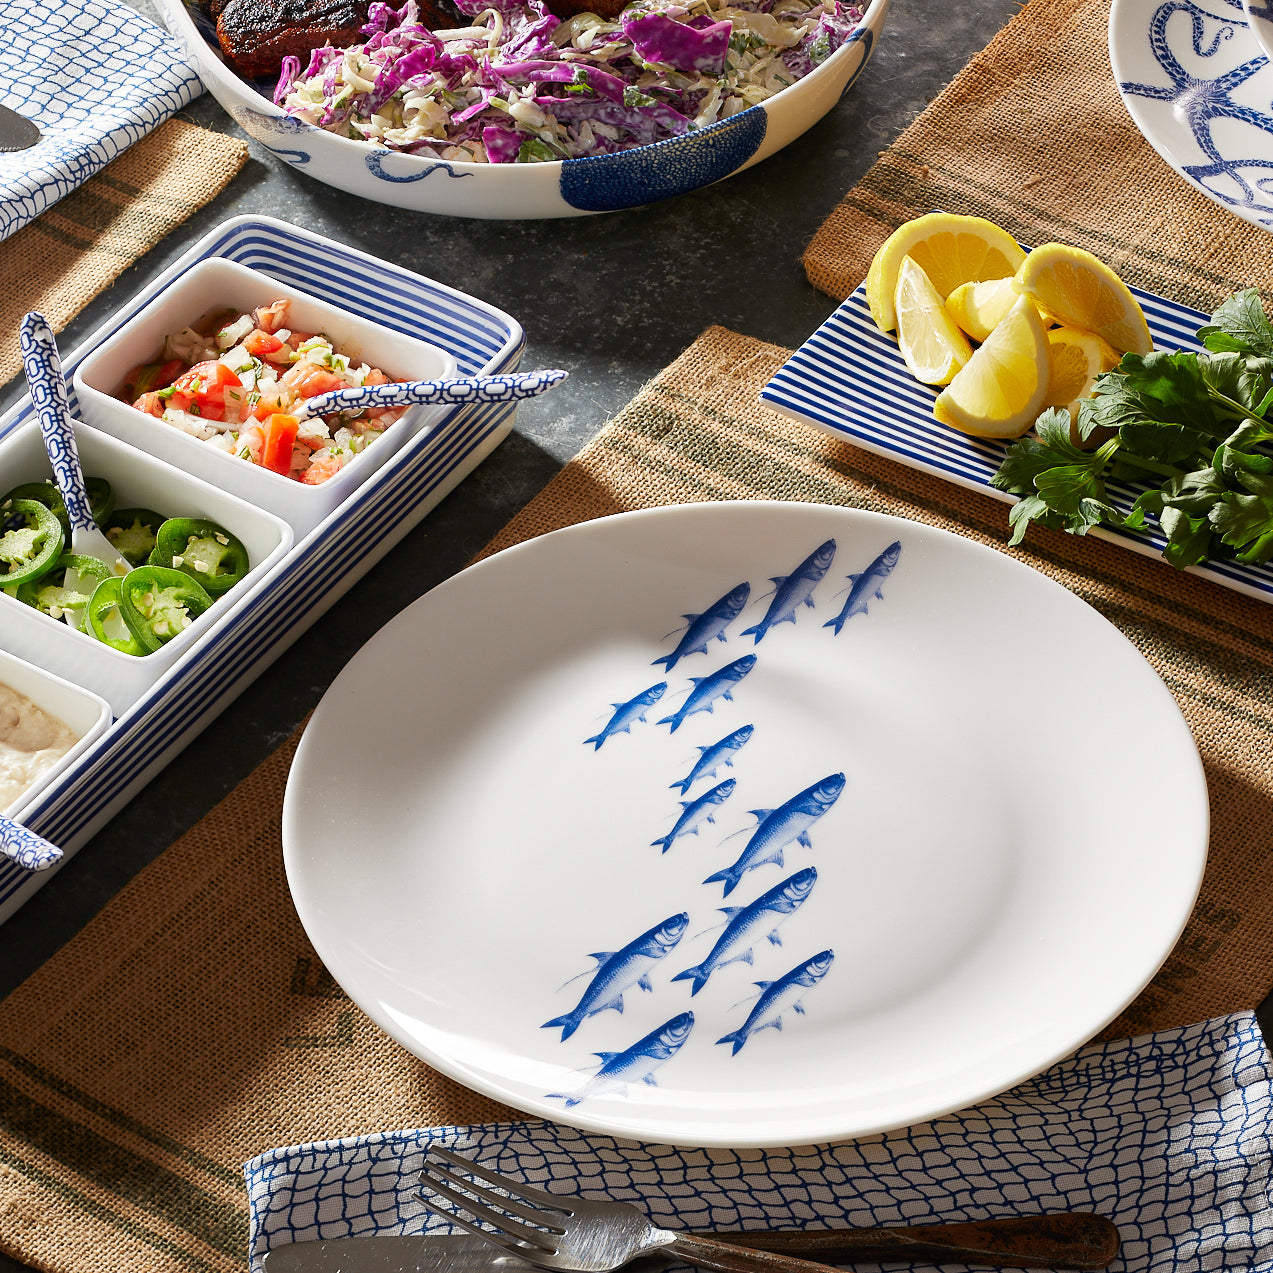 School of Fish Coupe Dinner Plate from Caskata Artisanal Home, a white ceramic plate with a pattern of blue fish swimming in a curved line, viewed from above; this premium porcelain dinnerware is dishwasher safe.